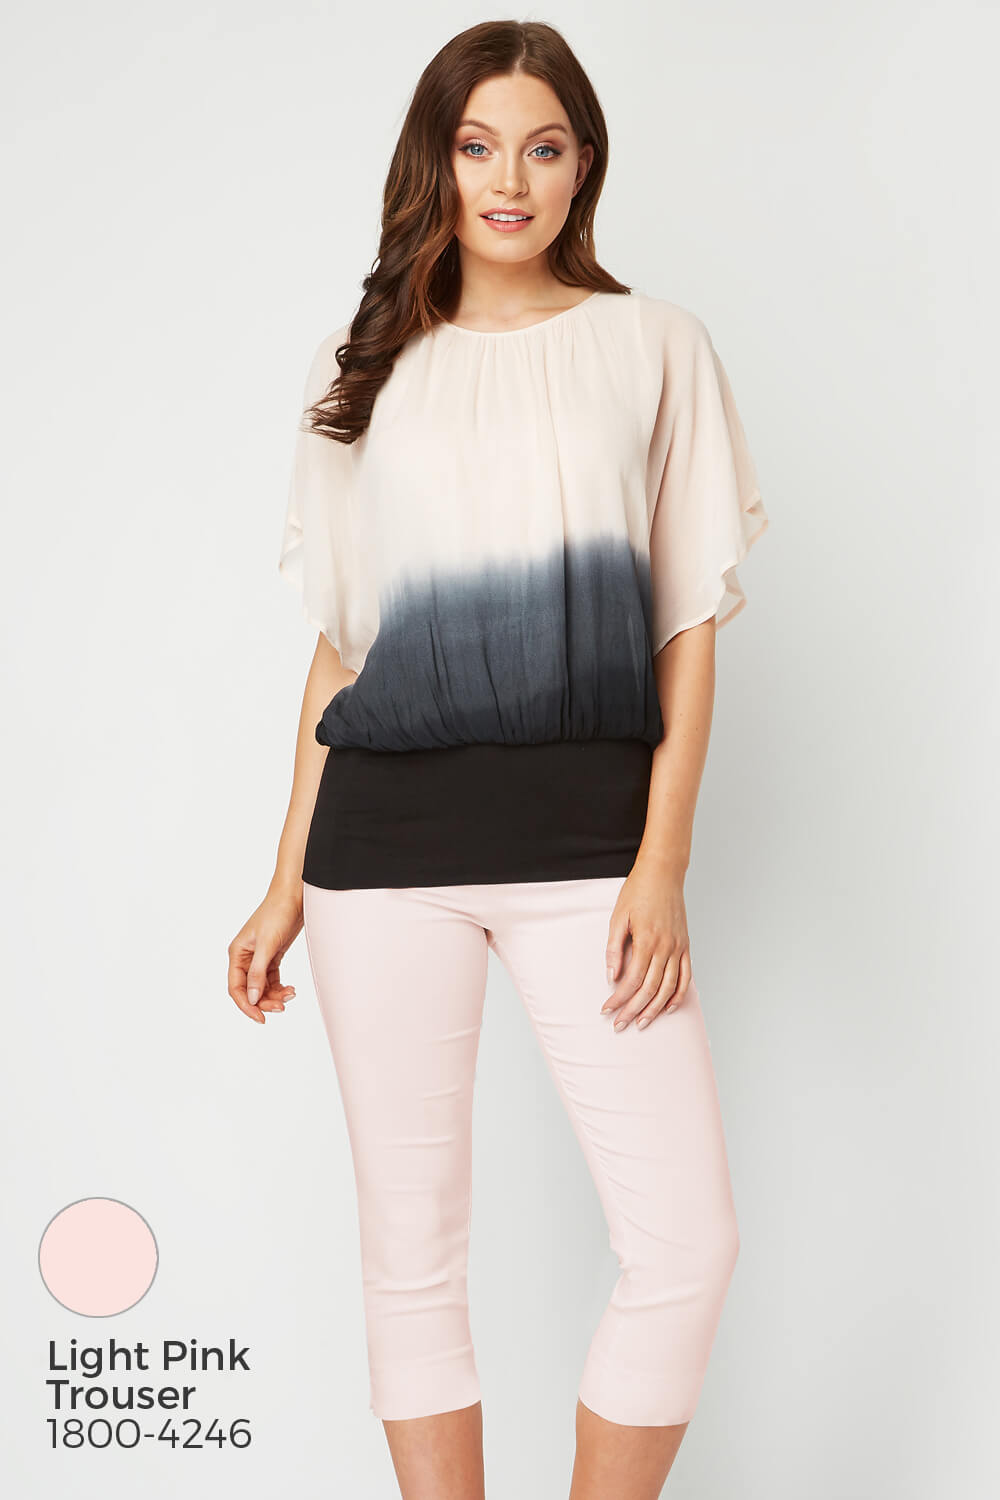 PINK Ombre Batwing Top, Image 7 of 8